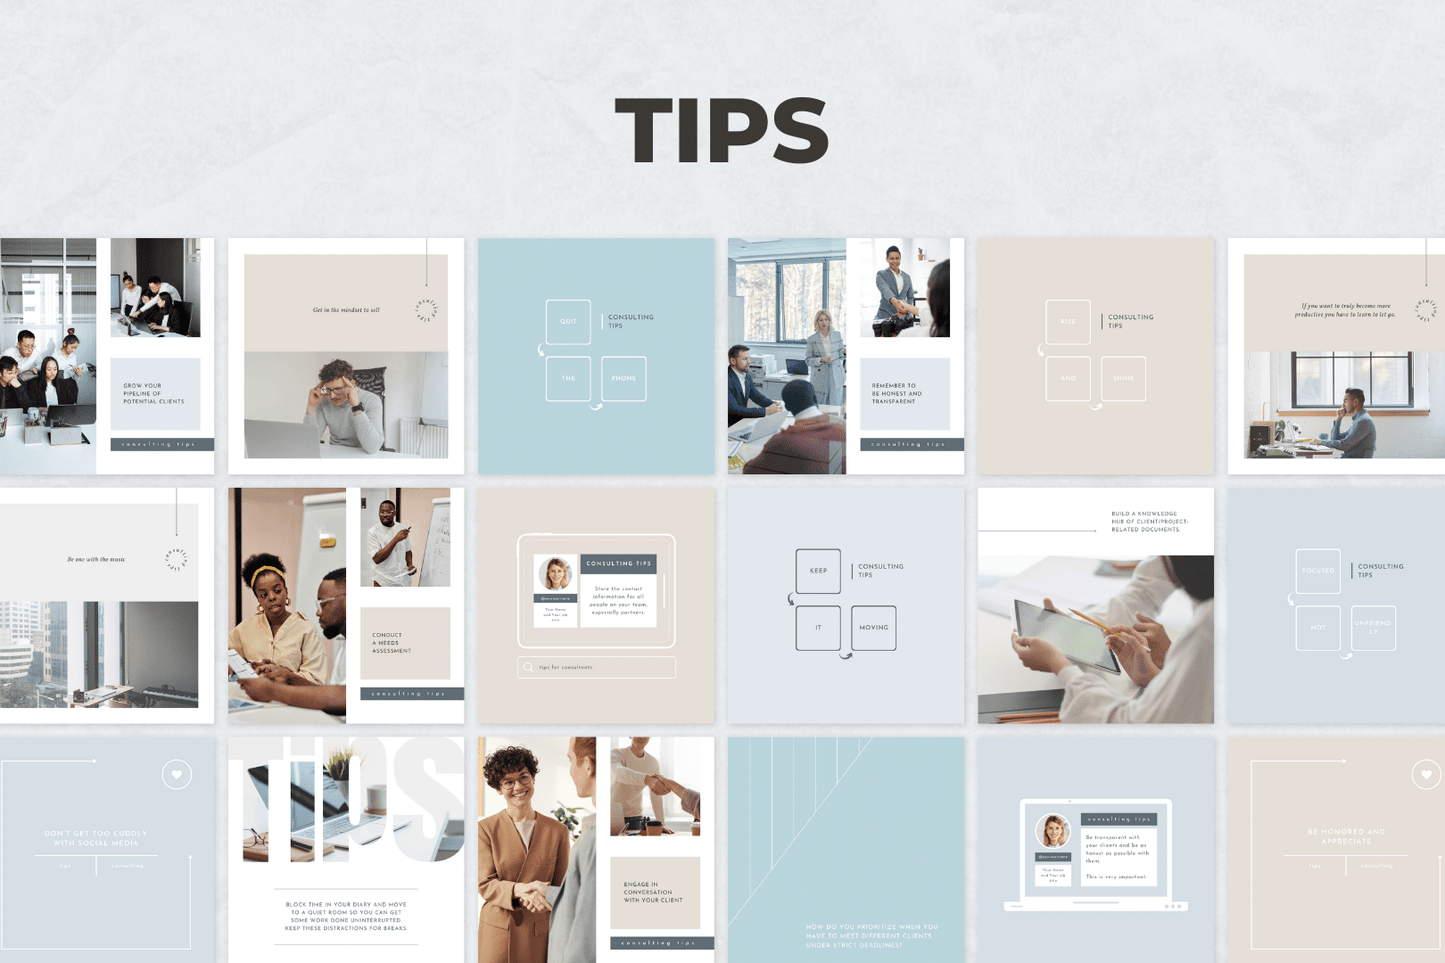 200 Consulting Services Templates for Social Media